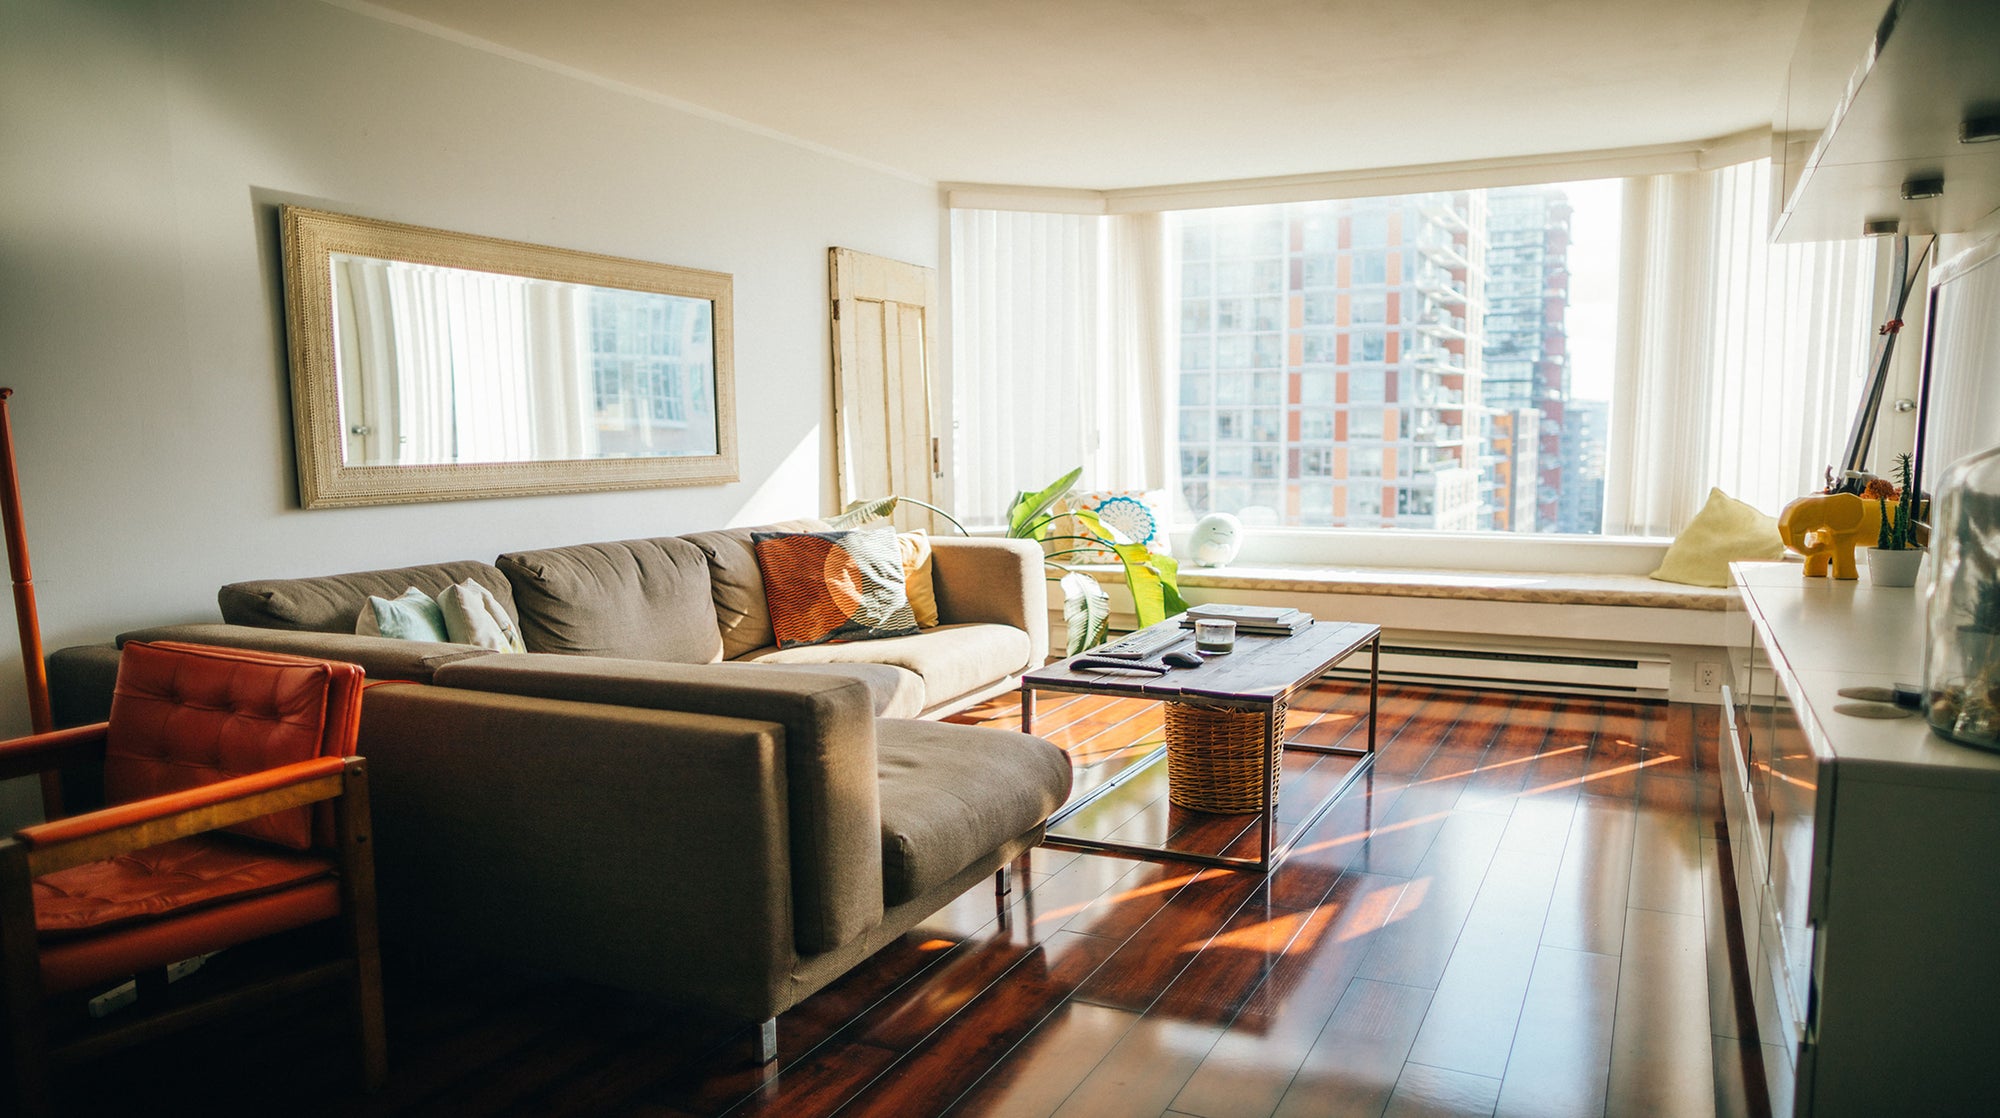 Photo of a condo unit's living room area with a bay window